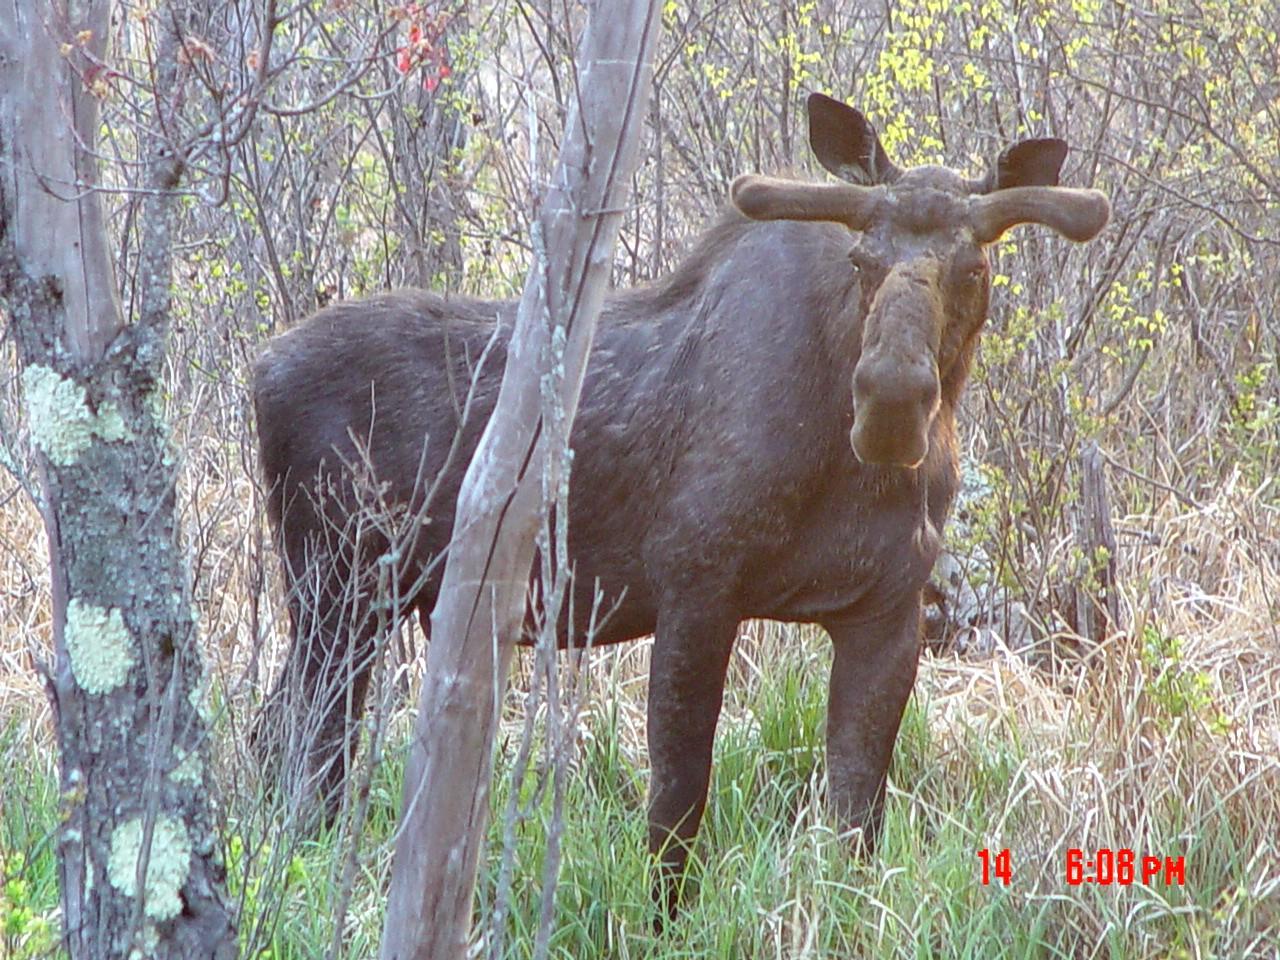 The Cornish Moose (user submitted)